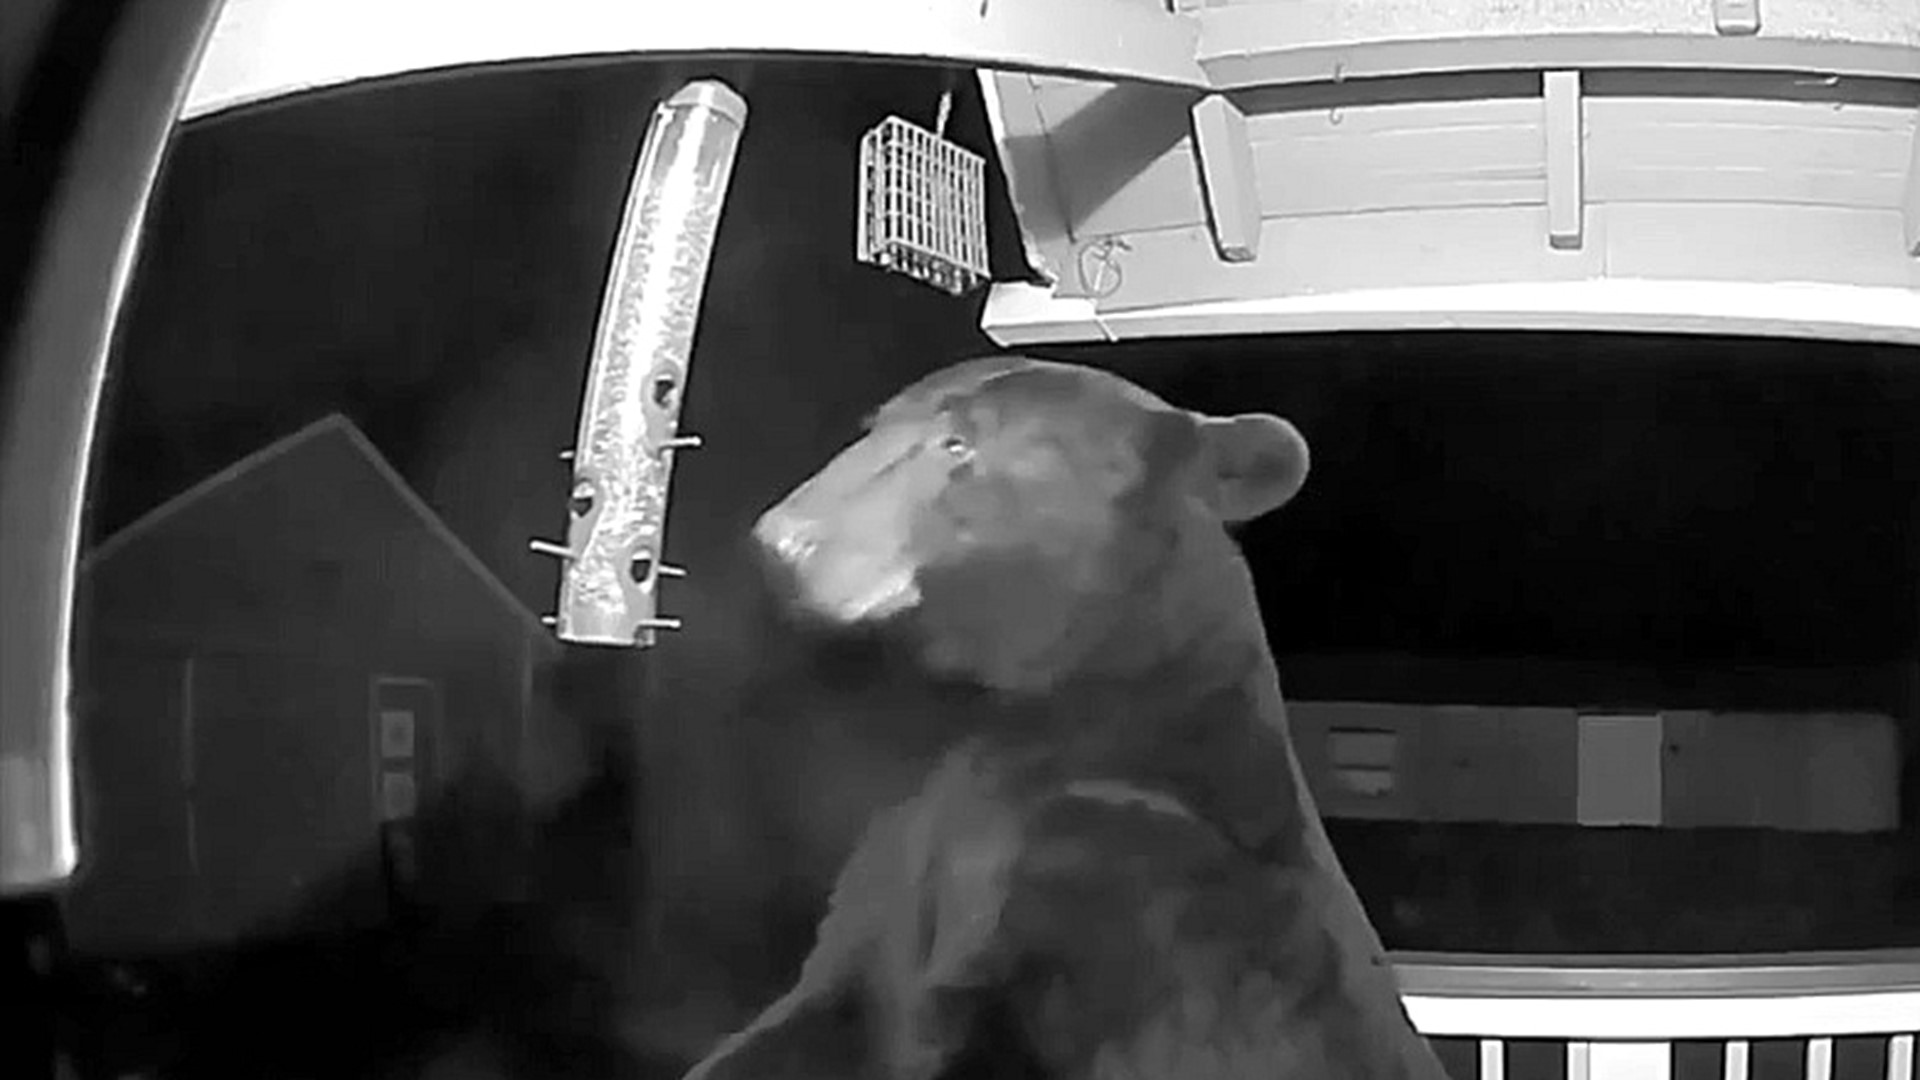 Bird Feeder 'Just Right' for Bear Caught on Camera in Wayne County